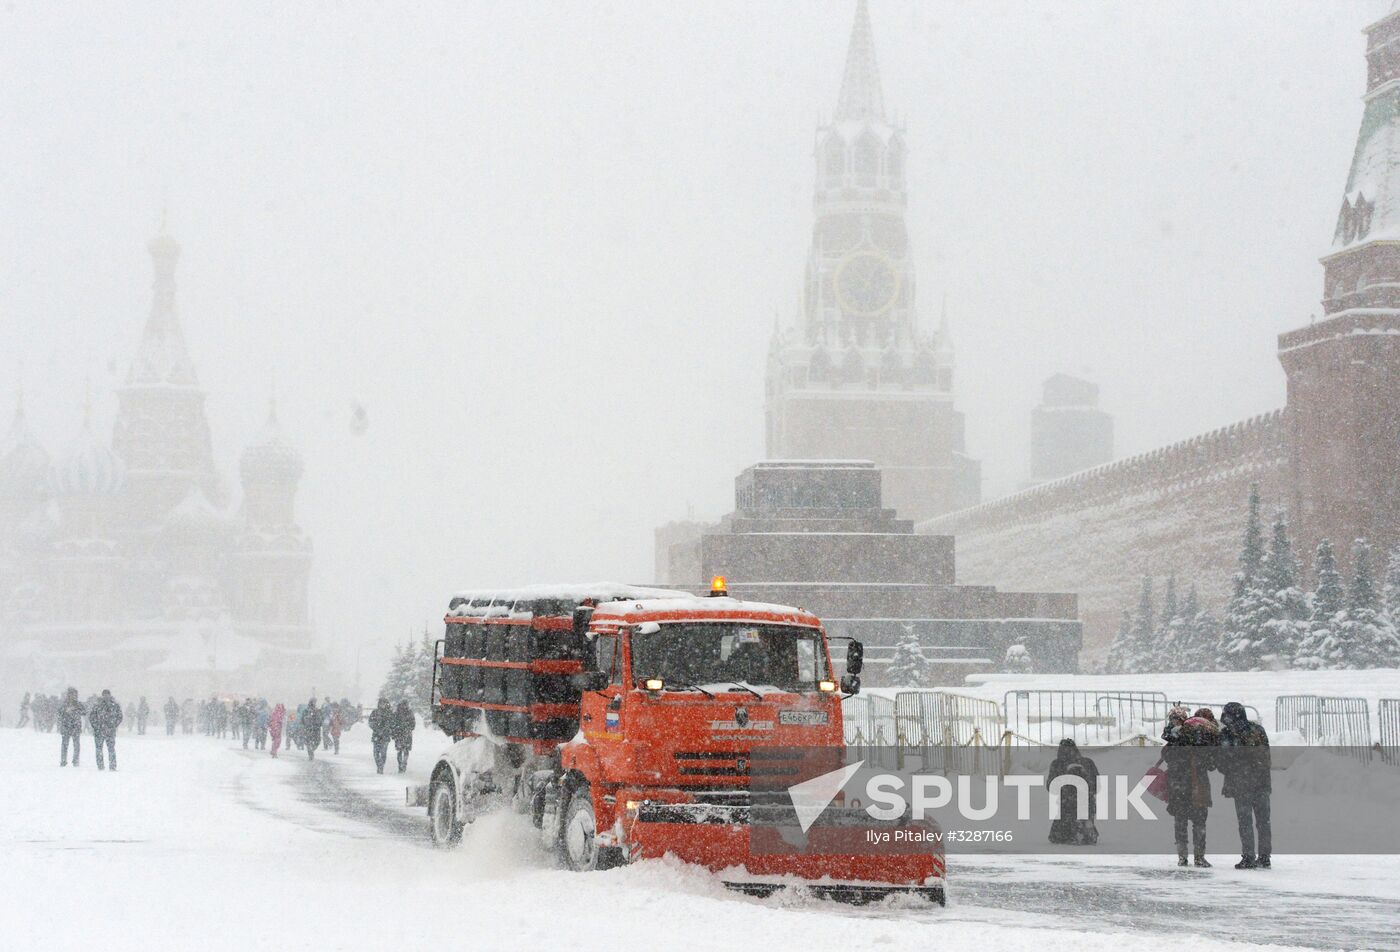 Snowfall in Moscow